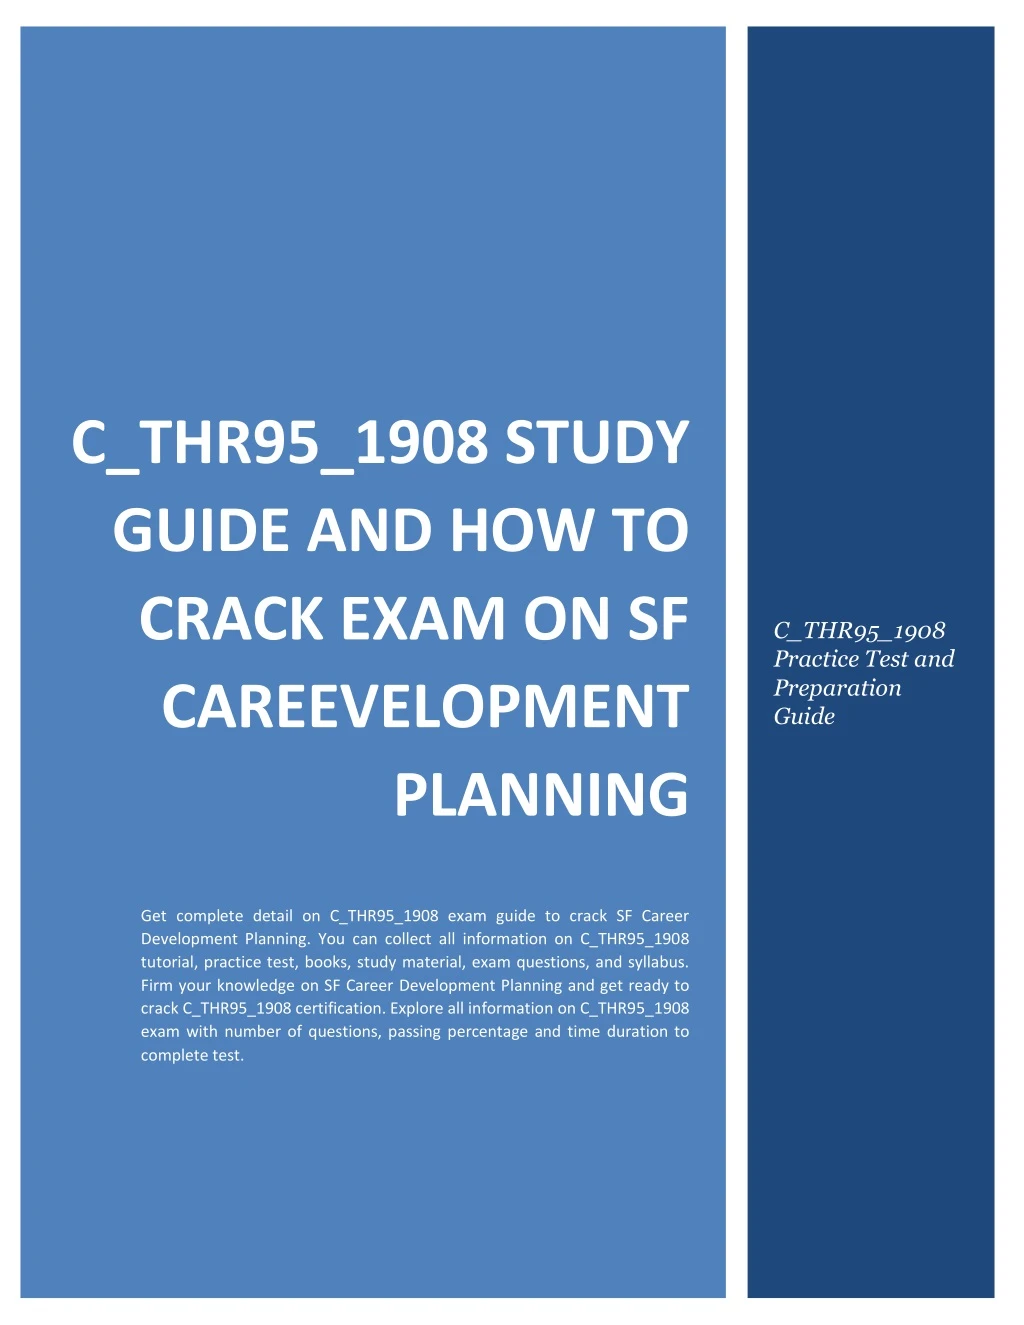 c thr95 1908 study guide and how to crack exam